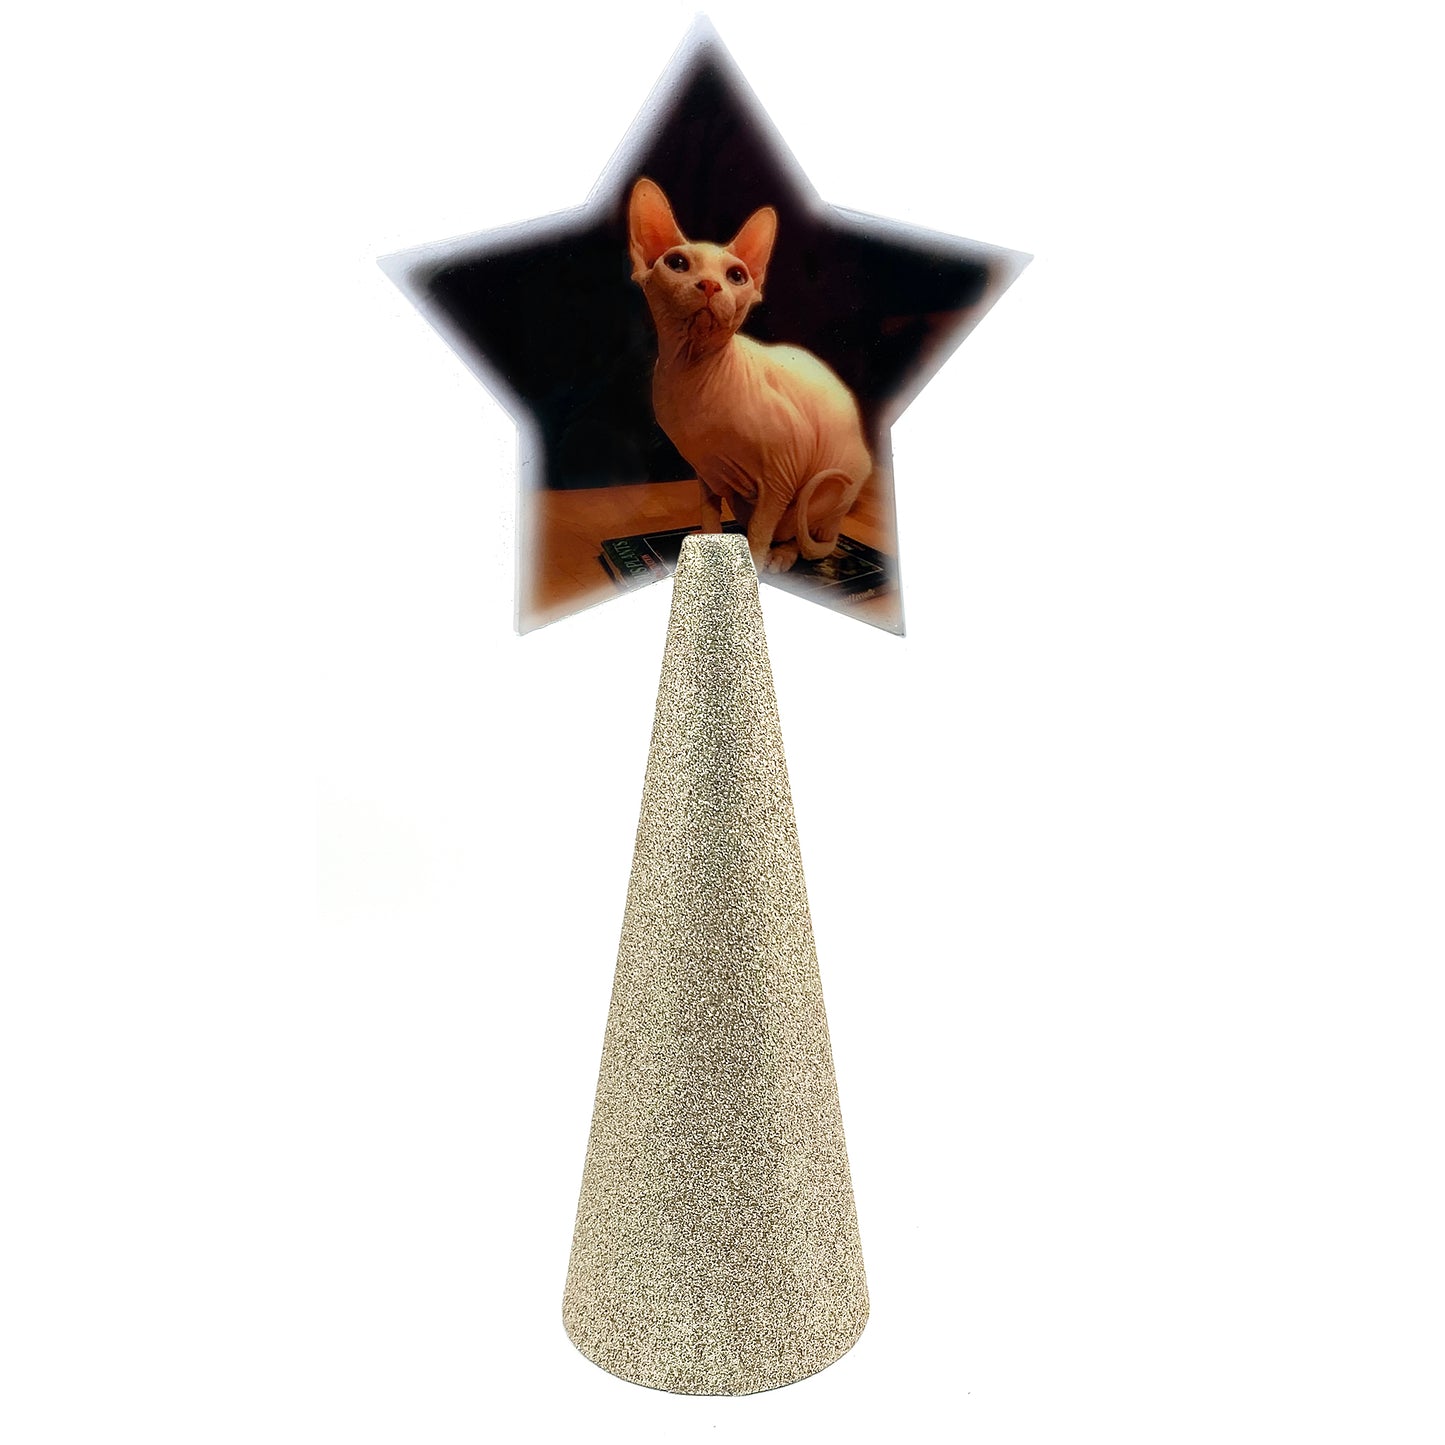 Custom tree topper - White Star with sample sphynx cat photo - champagne gold glitter cone